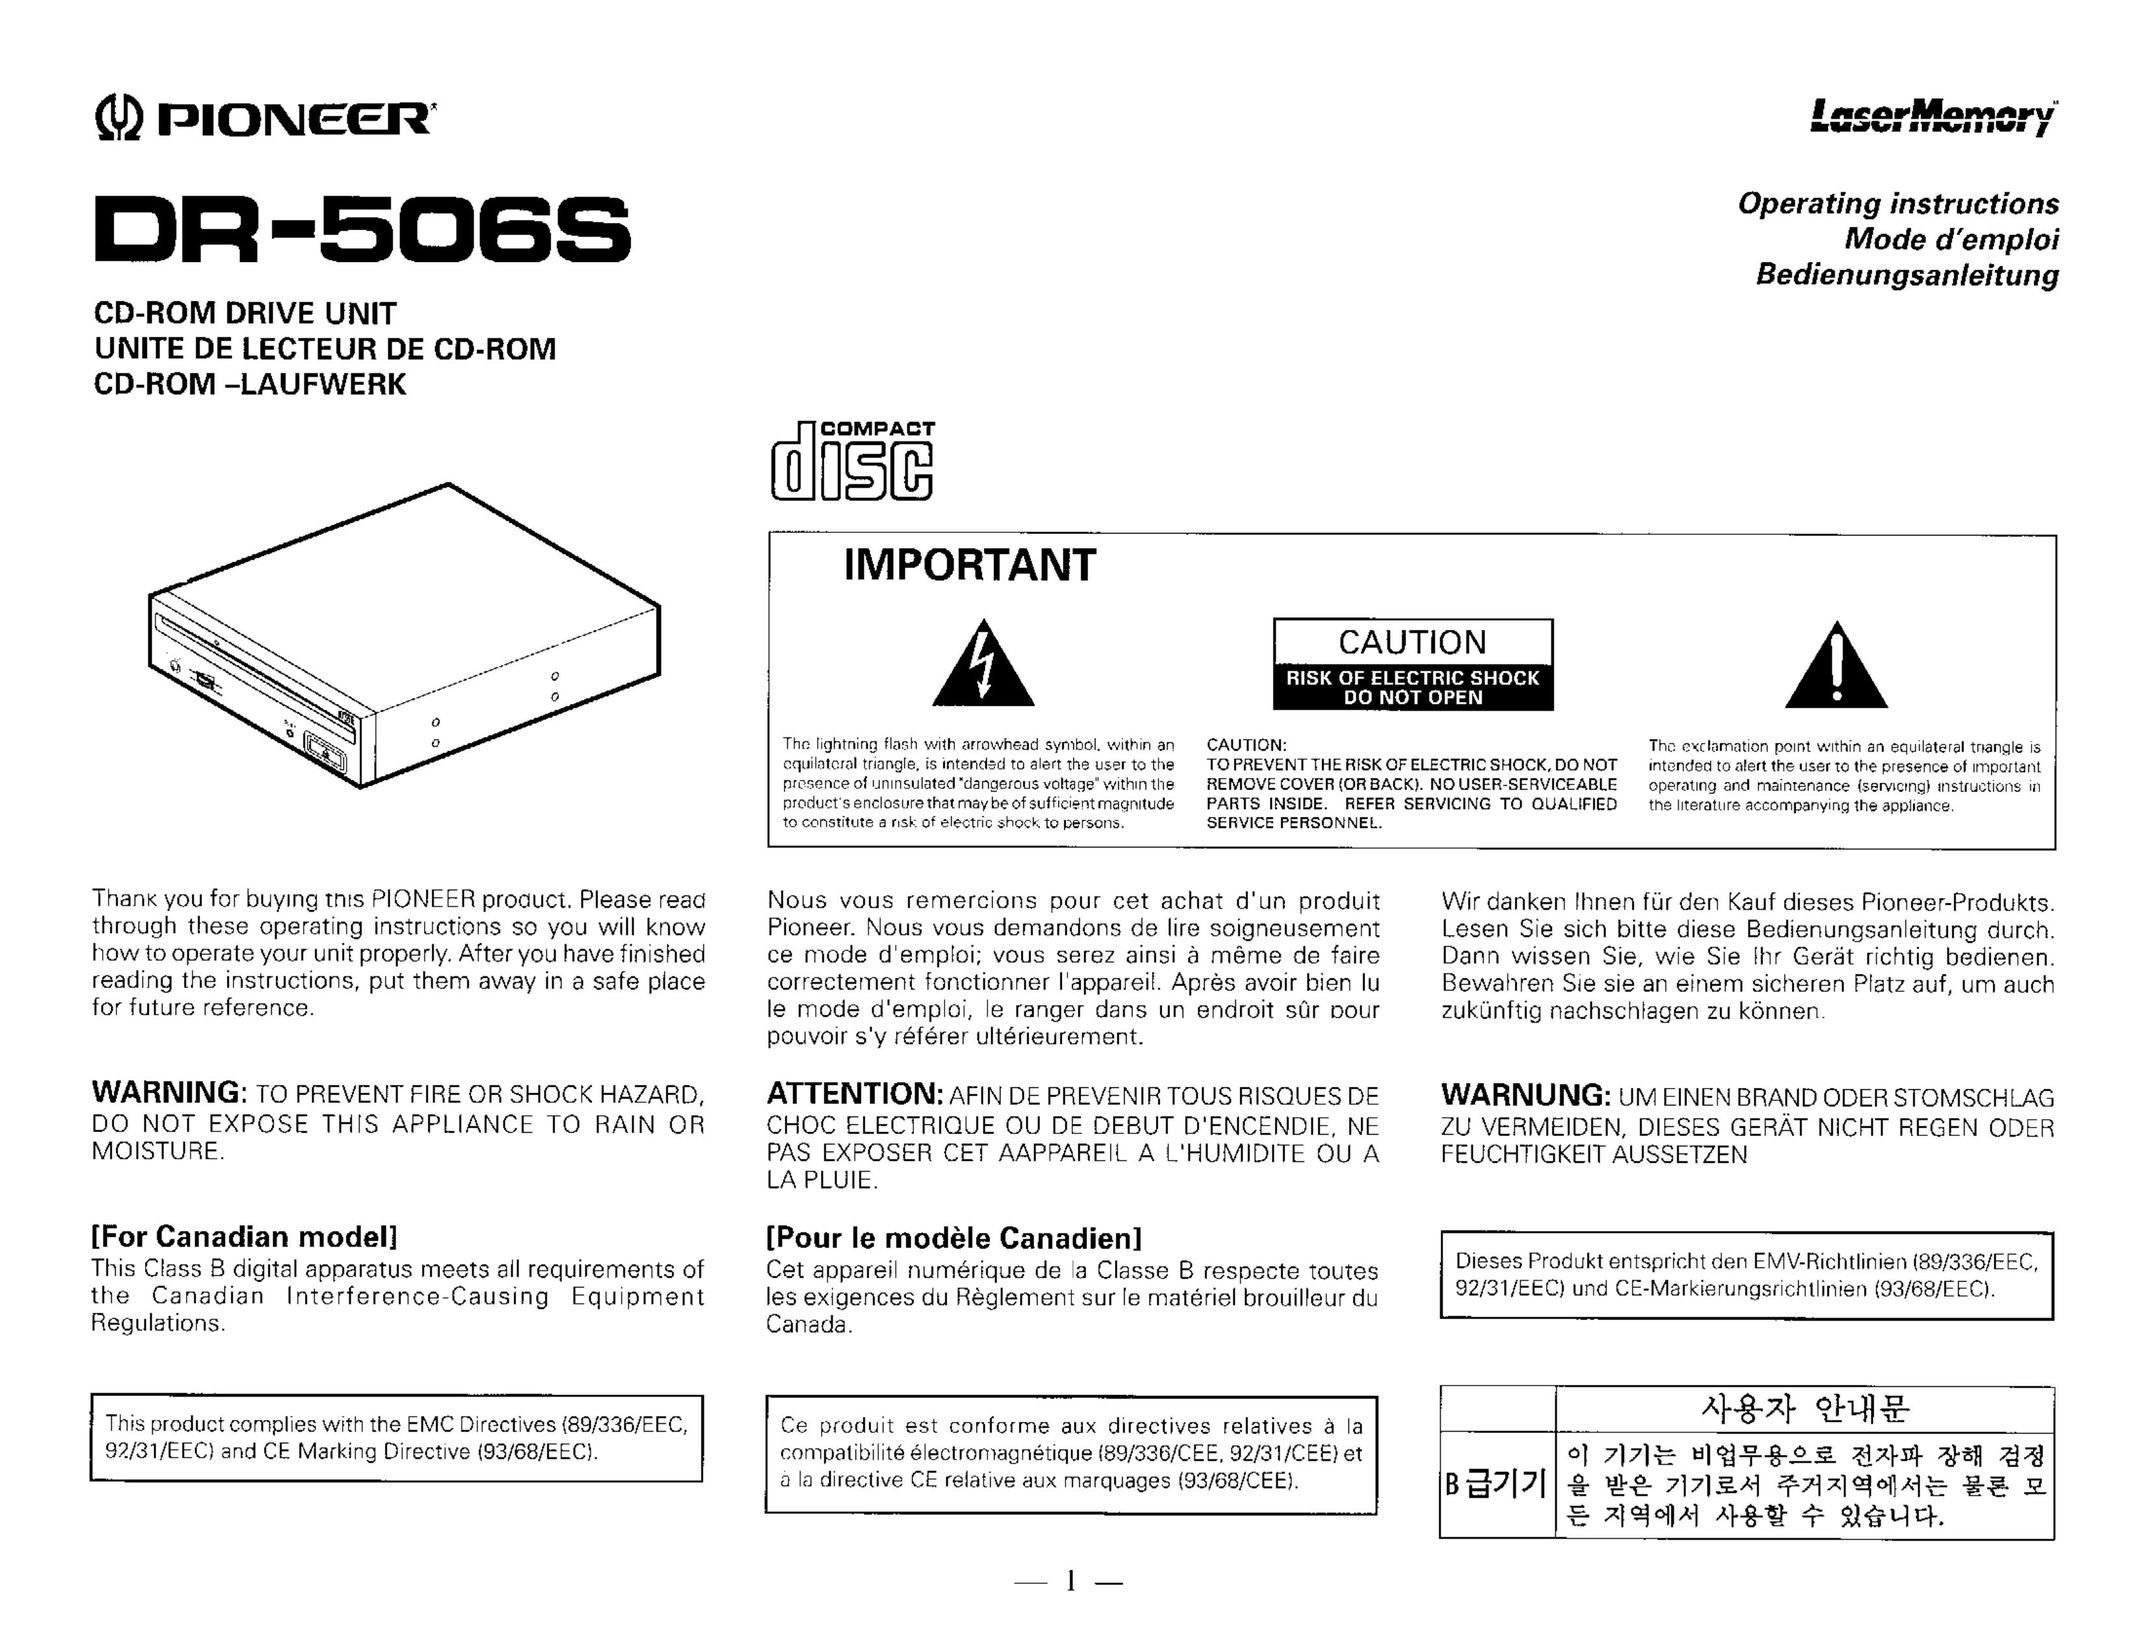 Pioneer DR-506S Computer Drive User Manual